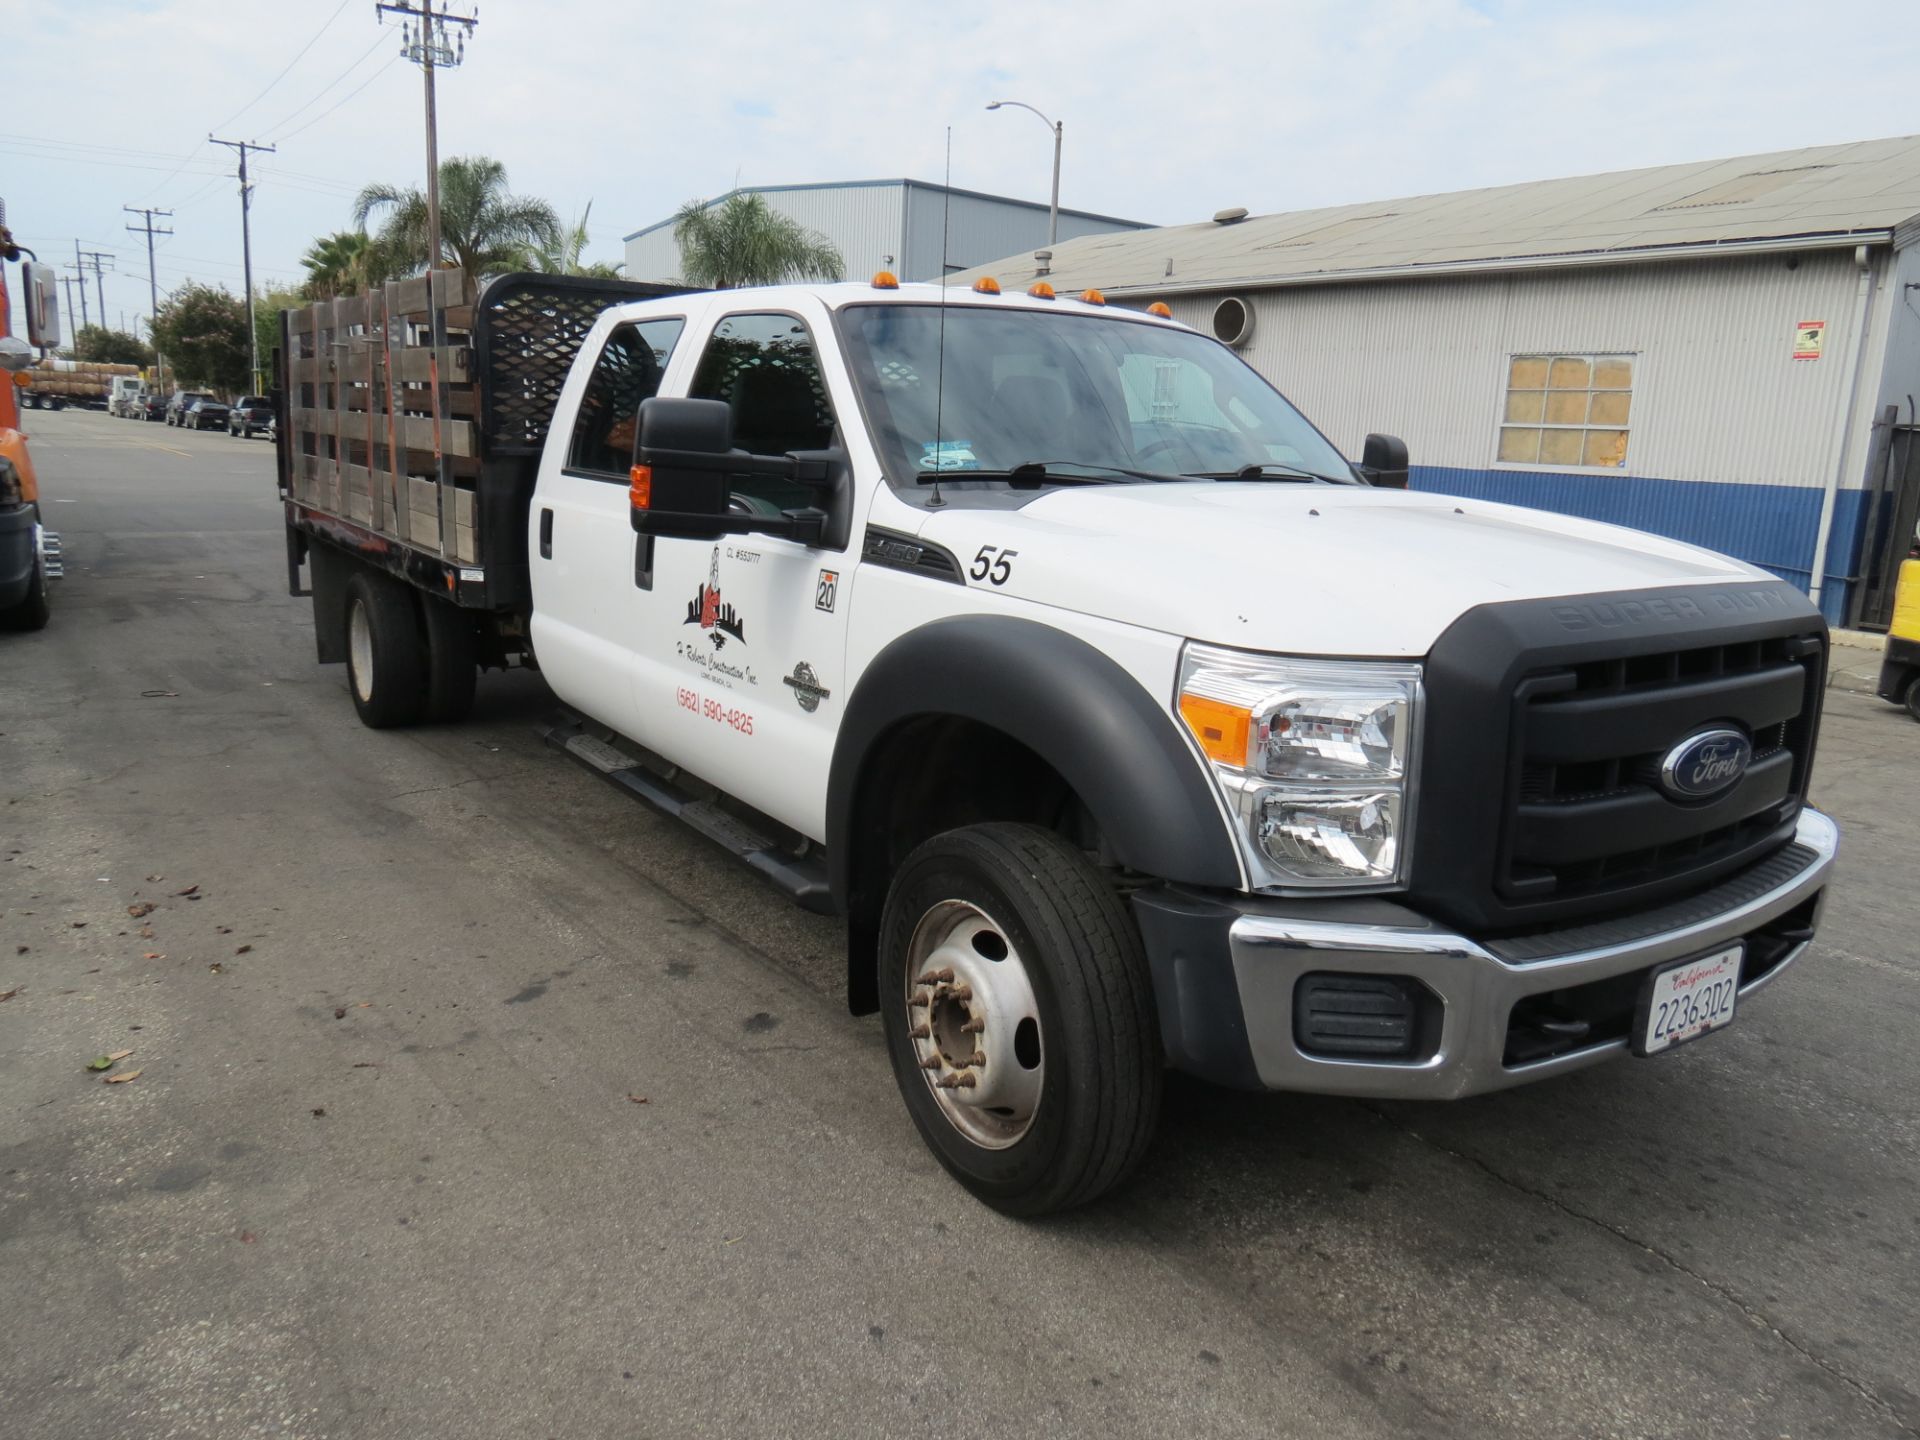 2015 Ford F-450 SUPER DUTY STAKE BED TRUCK, WITH LIFT GATE, SUPER CREW CAB , 6.7 POWER STROKE DIESEL - Image 2 of 34